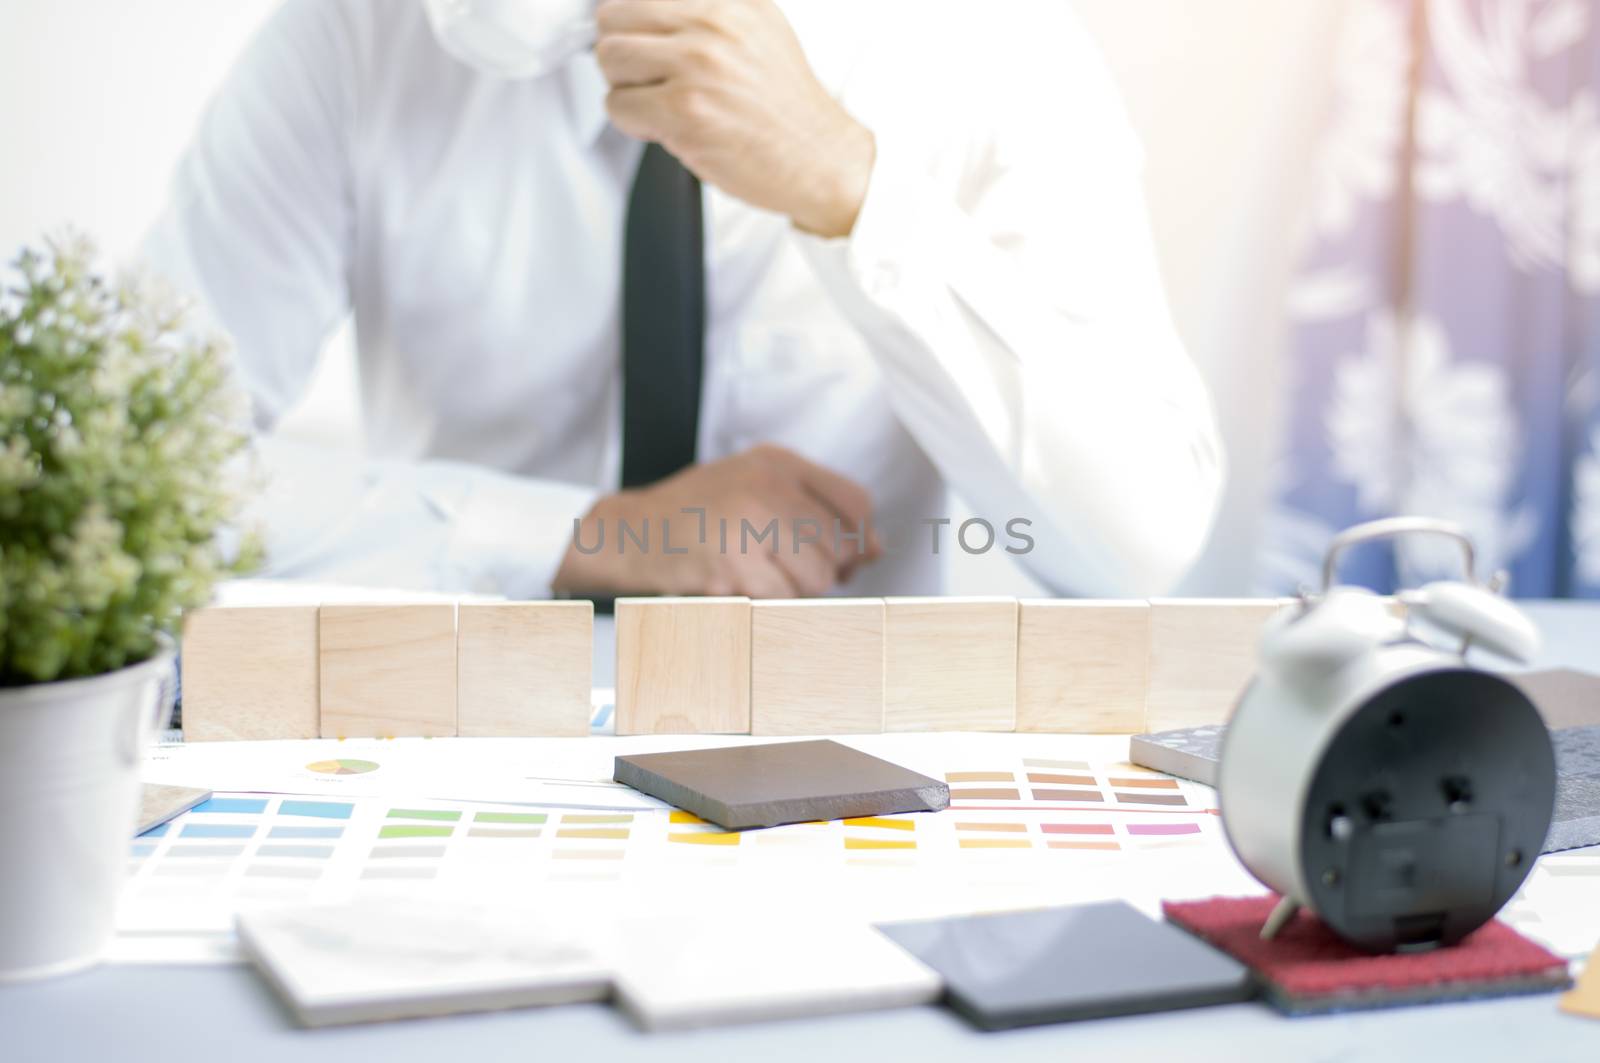 Wooden plate for text on the work table. Defocus man holding cup of coffee for background. Interior design concept. Materials design for home enovation.